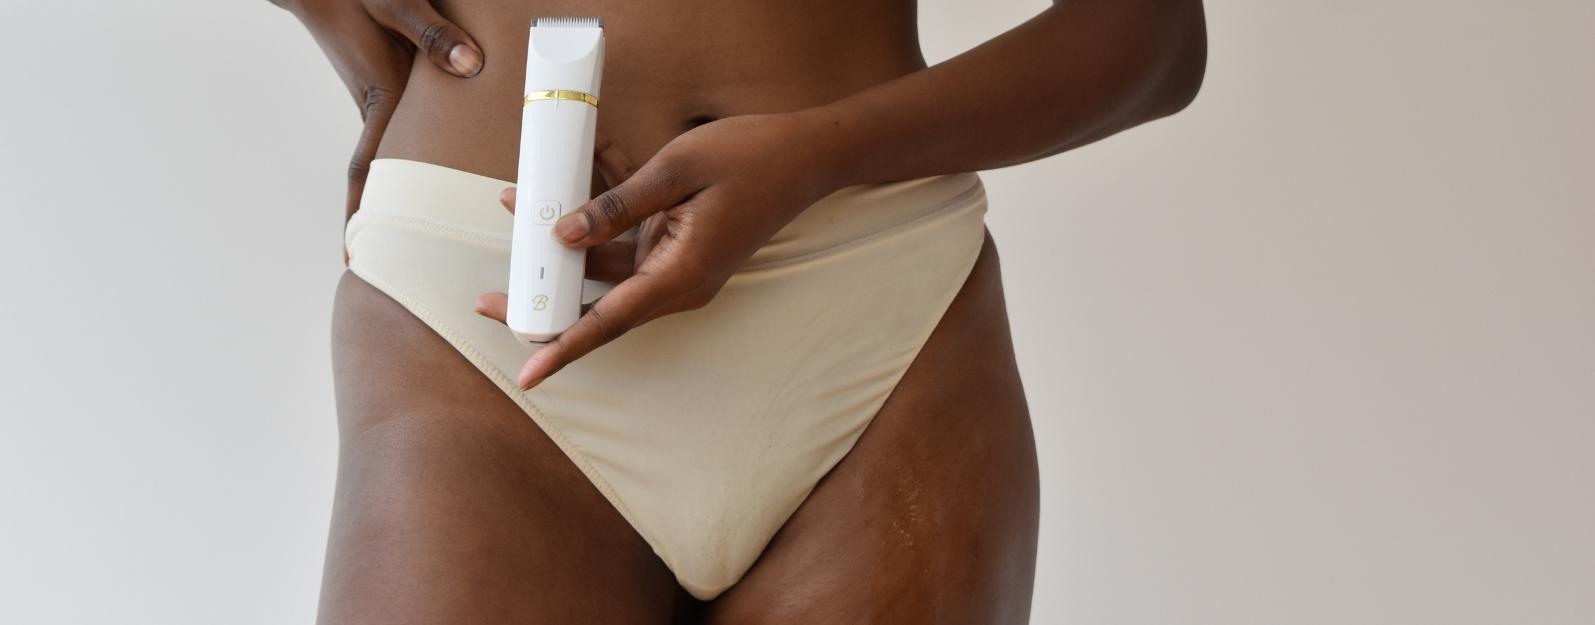 Using an electric trimmer on your pubic hair & bikini line